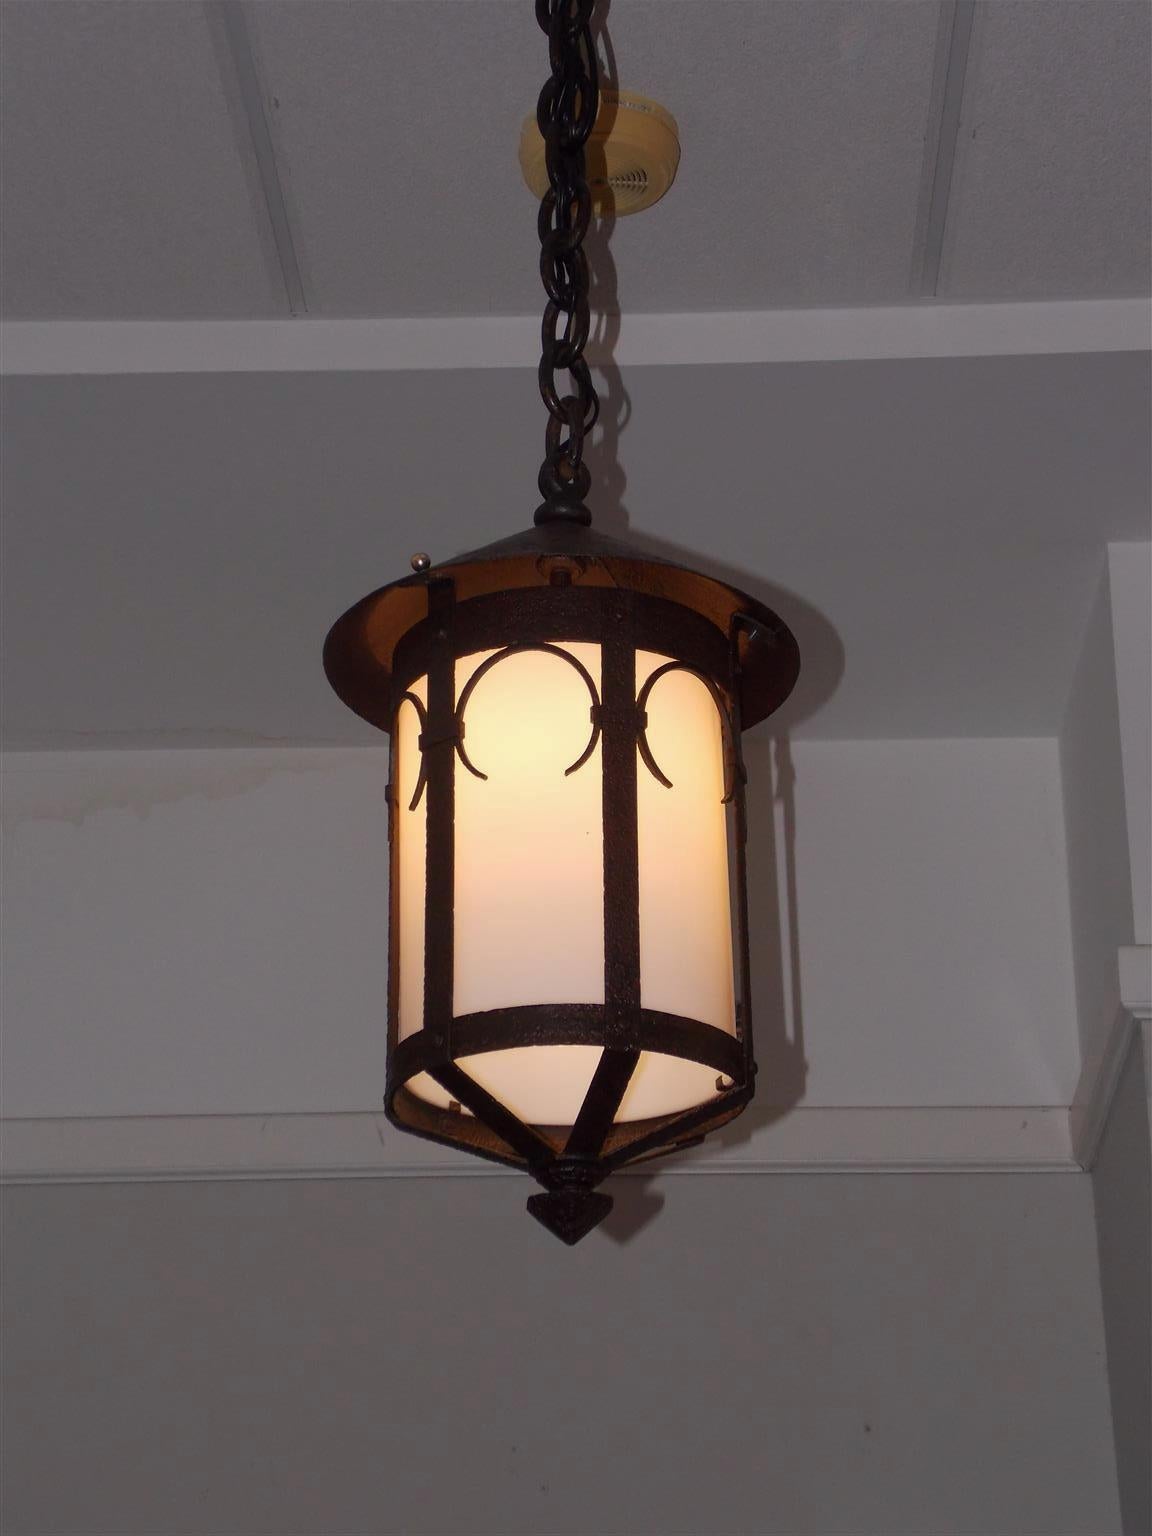 American wrought iron and milk glass hanging hall lantern with decorative arches and a centered faceted finial, Mid-19th century. Originally candle and has been electrified.